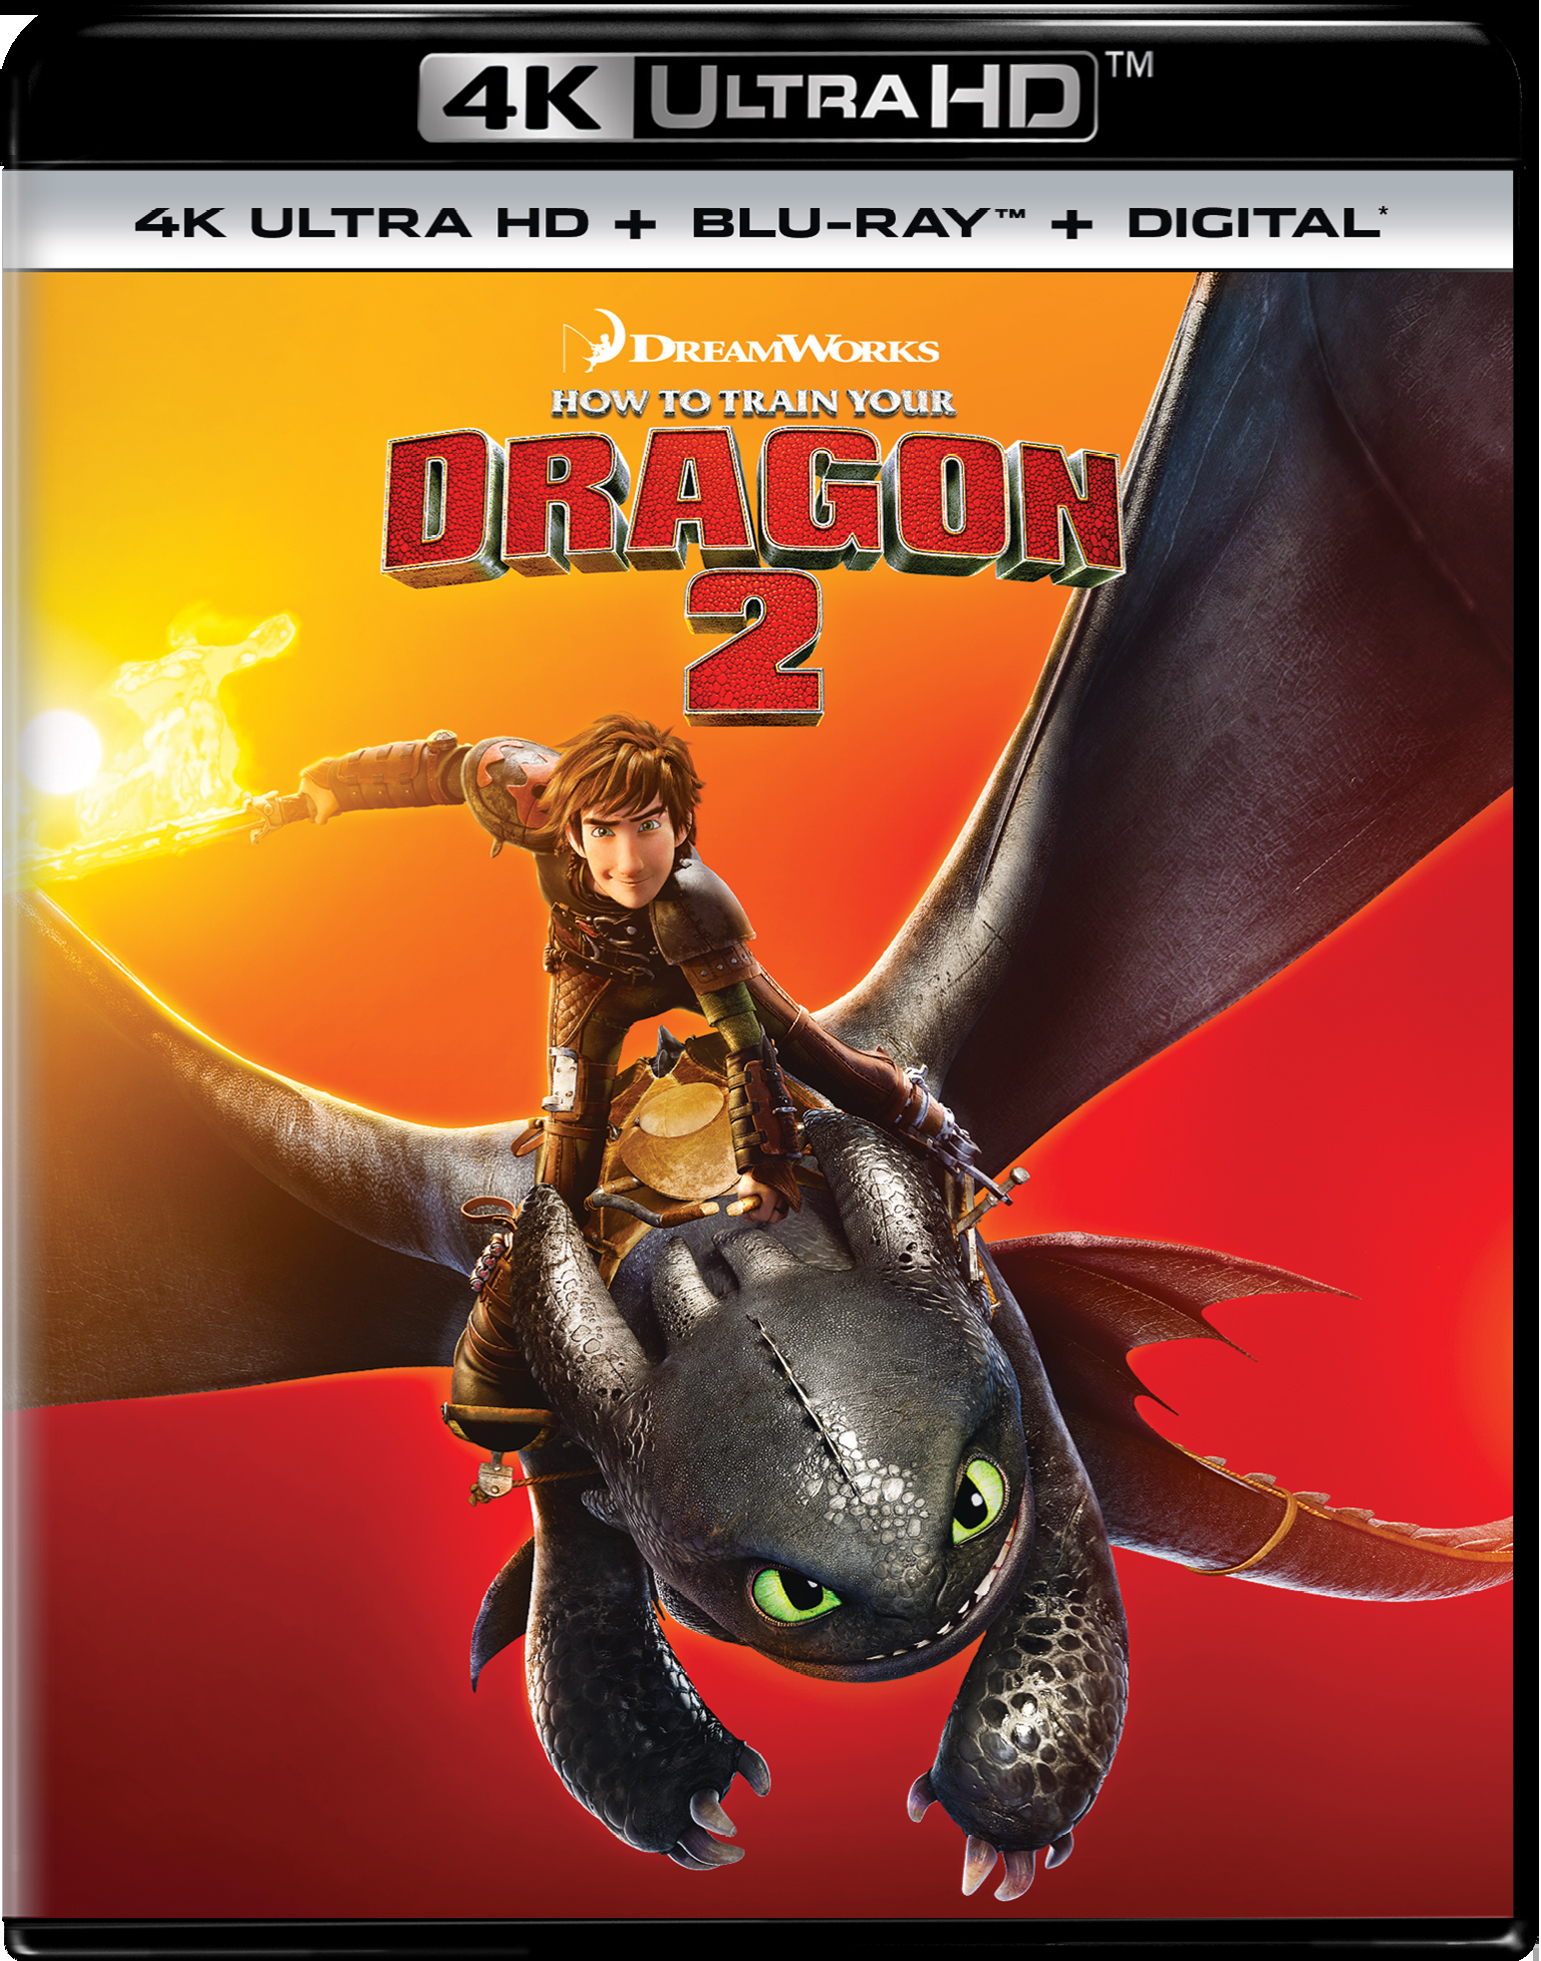 How To Train Your Dragon 2 (4K Ultra HD) - UHD [ 2014 ]  - Animation Movies On 4K Ultra HD Blu-ray - Movies On GRUV